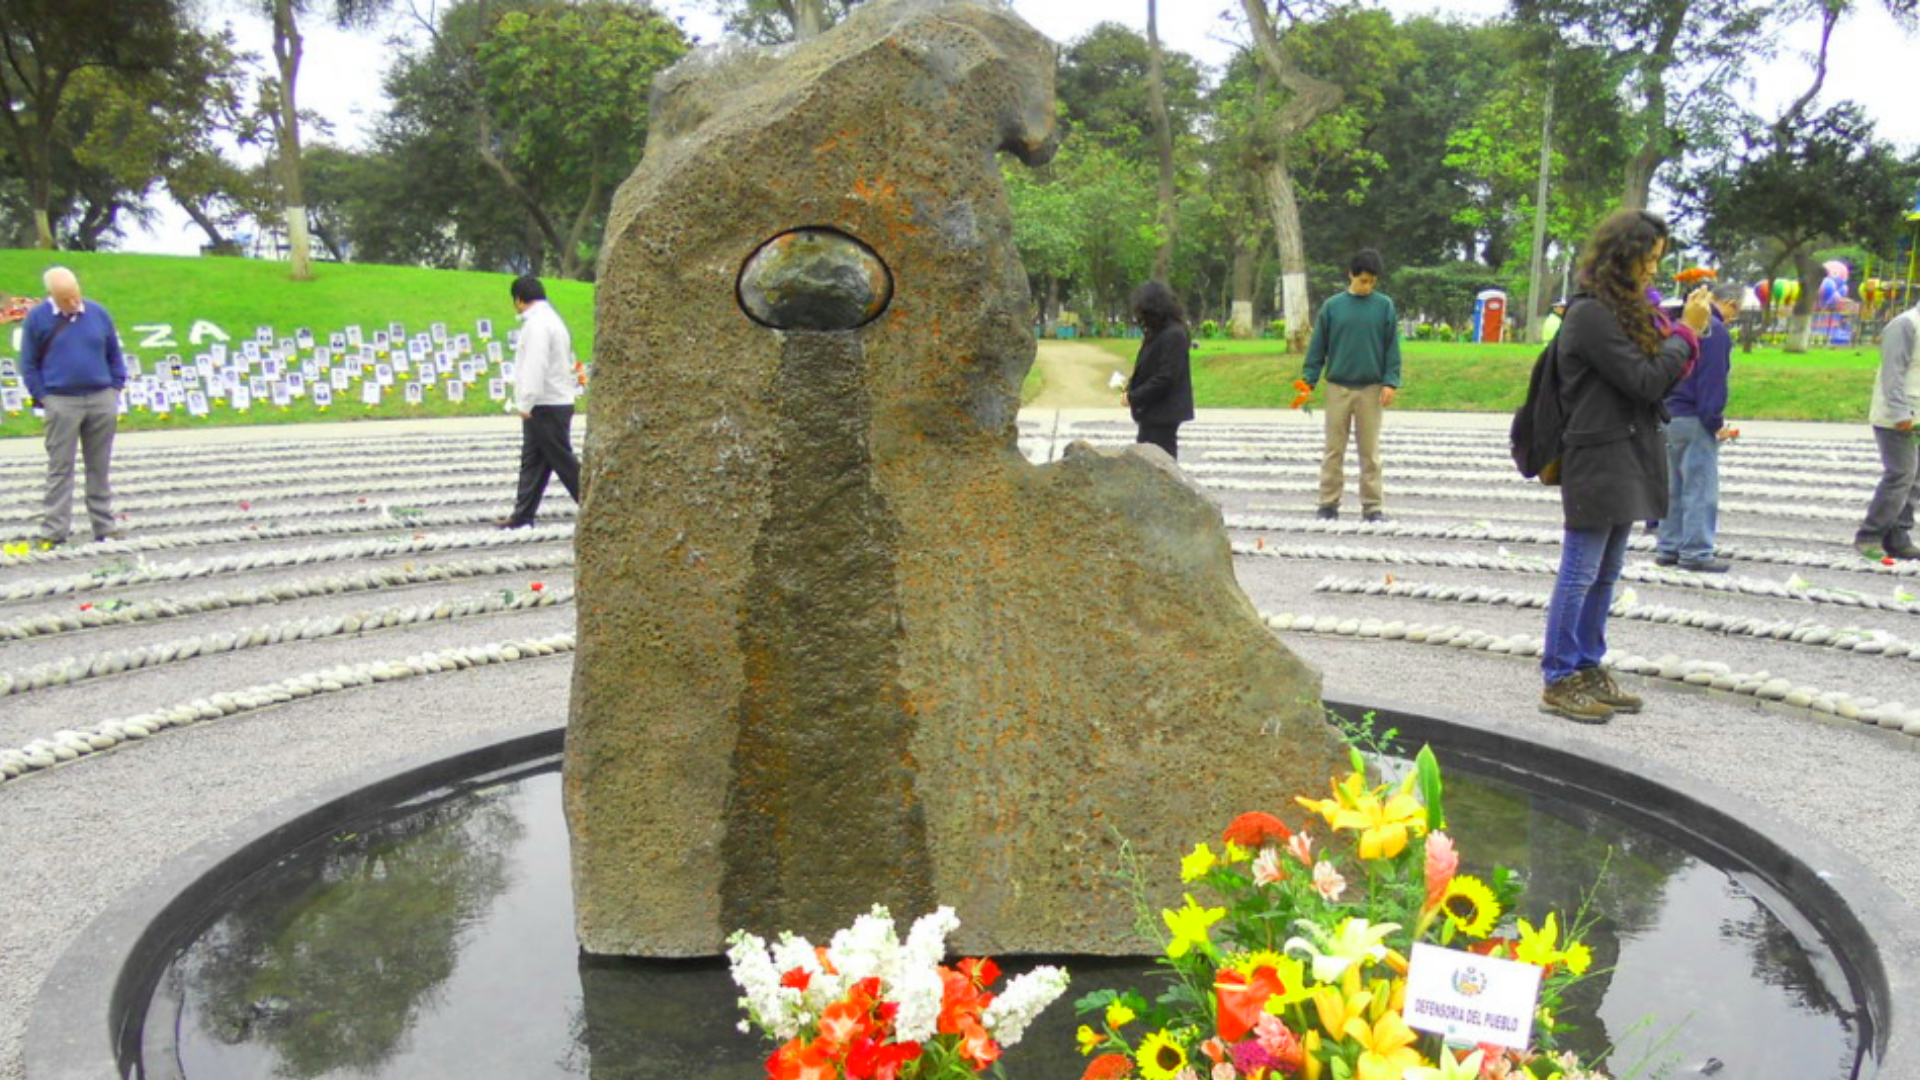 Statue in Peru of circles of pebbles in the middle of park with hunched figure in centre